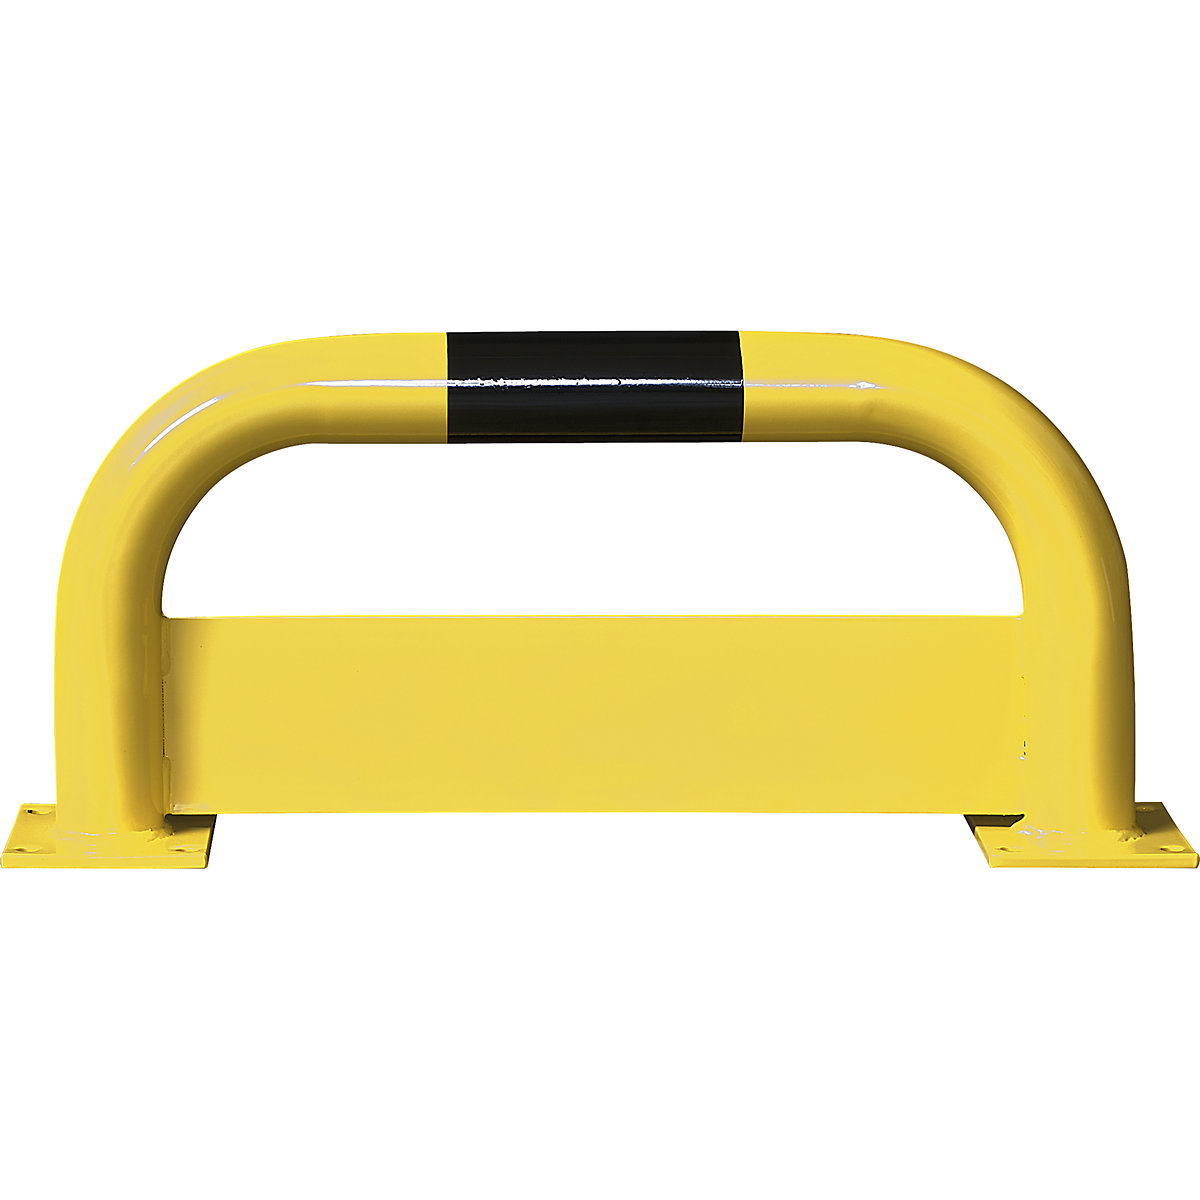 Crash protection bar with forklift guard